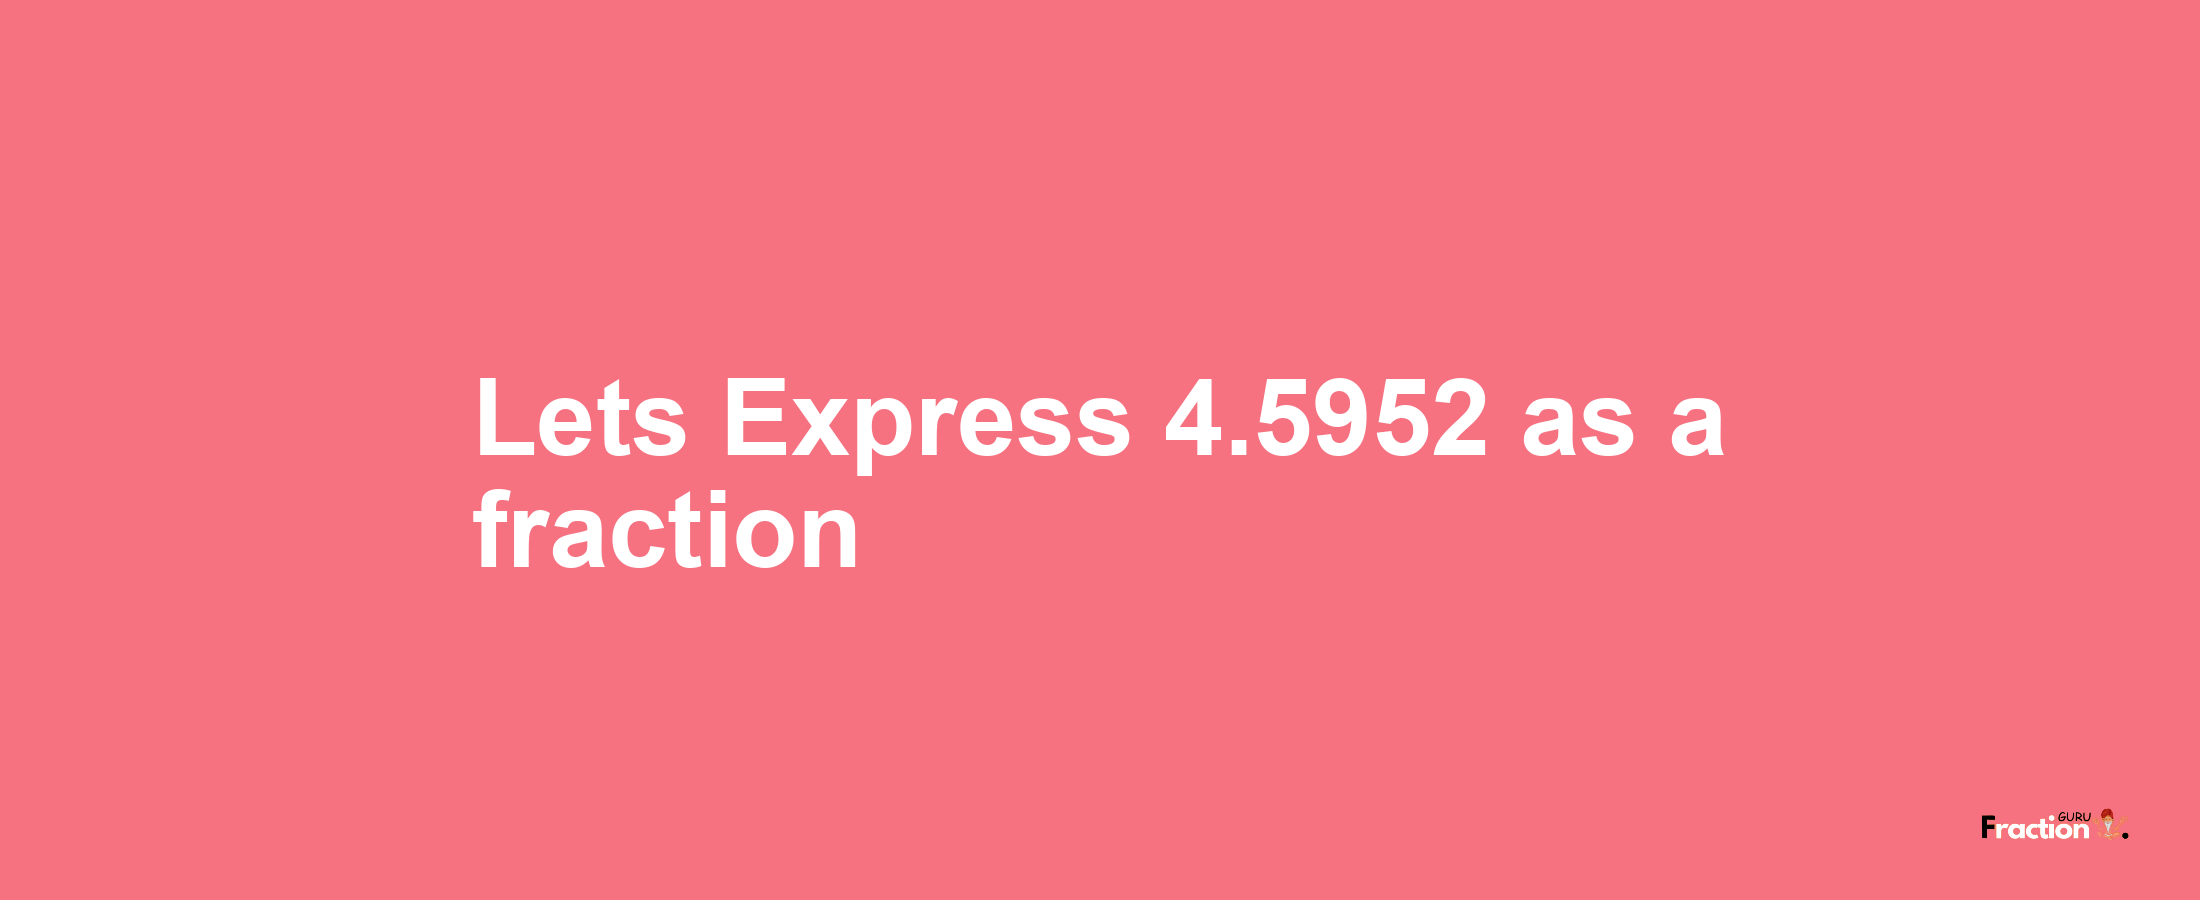 Lets Express 4.5952 as afraction